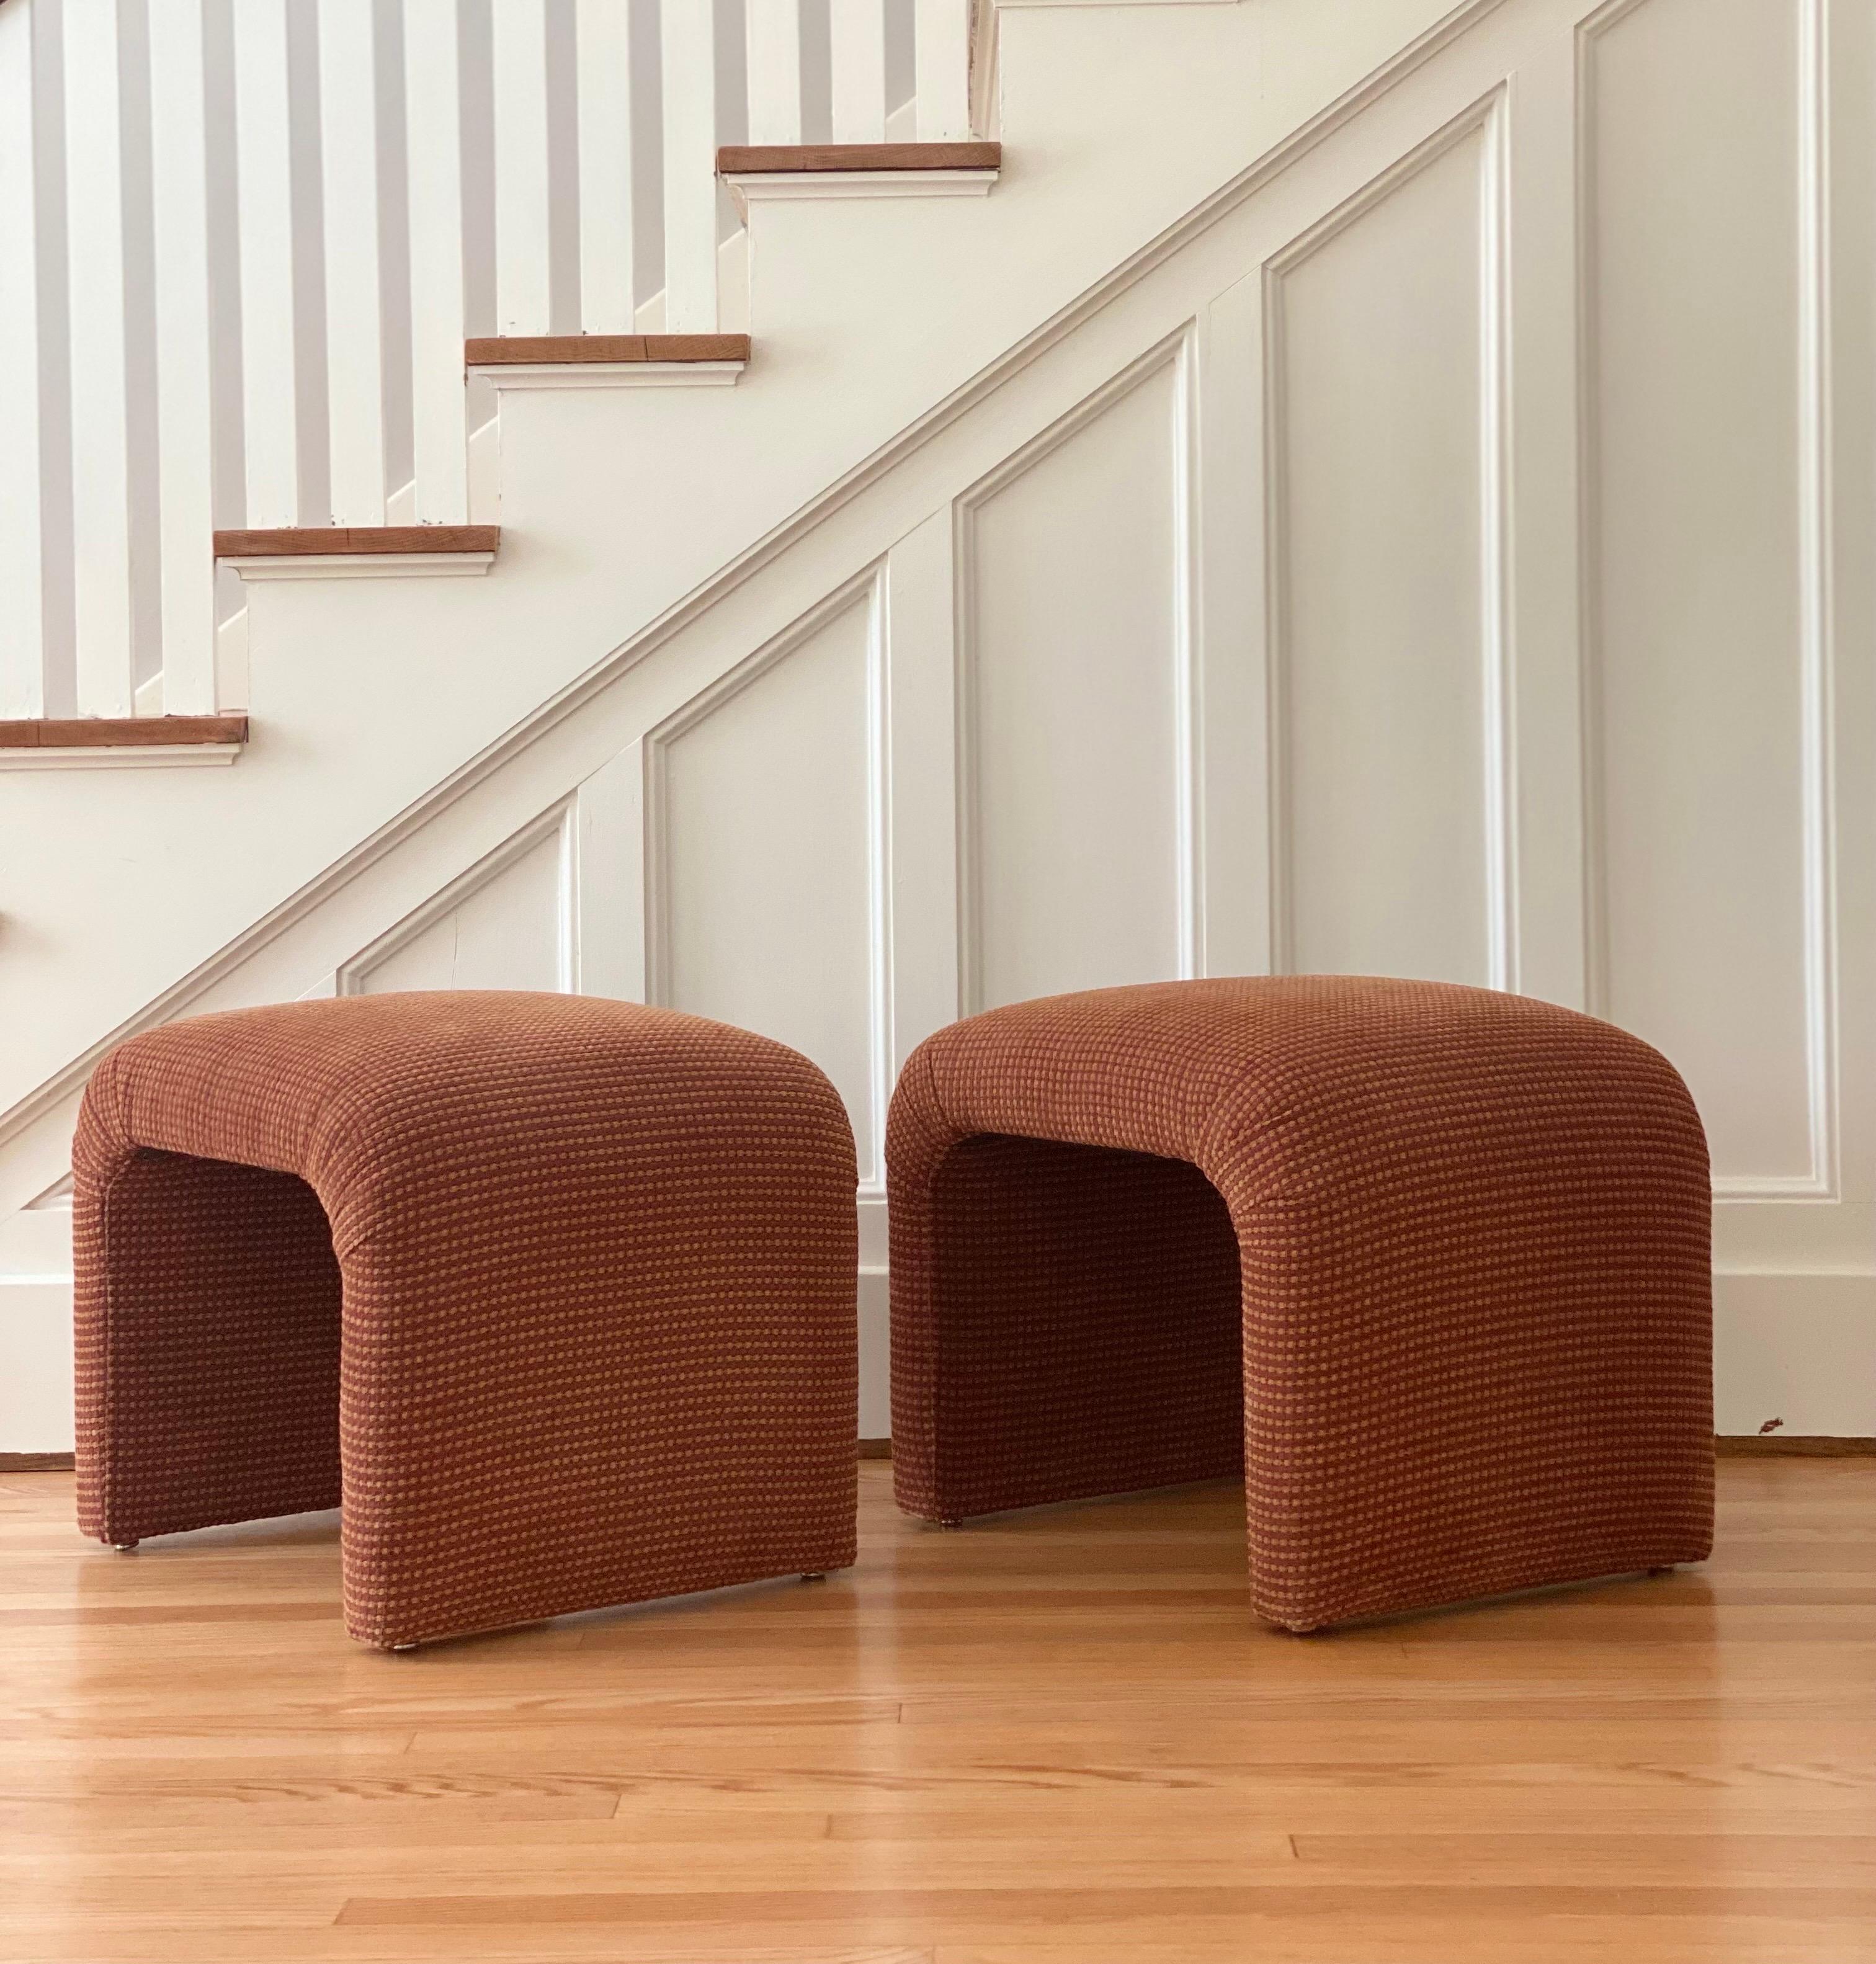 We are very pleased to offer a chic, vintage pair of Karl Springer style ottomans, circa the 1980s. Spotting a boldly curved silhouette, each piece is wrapped in its original shepherd’s check pattern upholstery. Fabric is soft to the touch and in